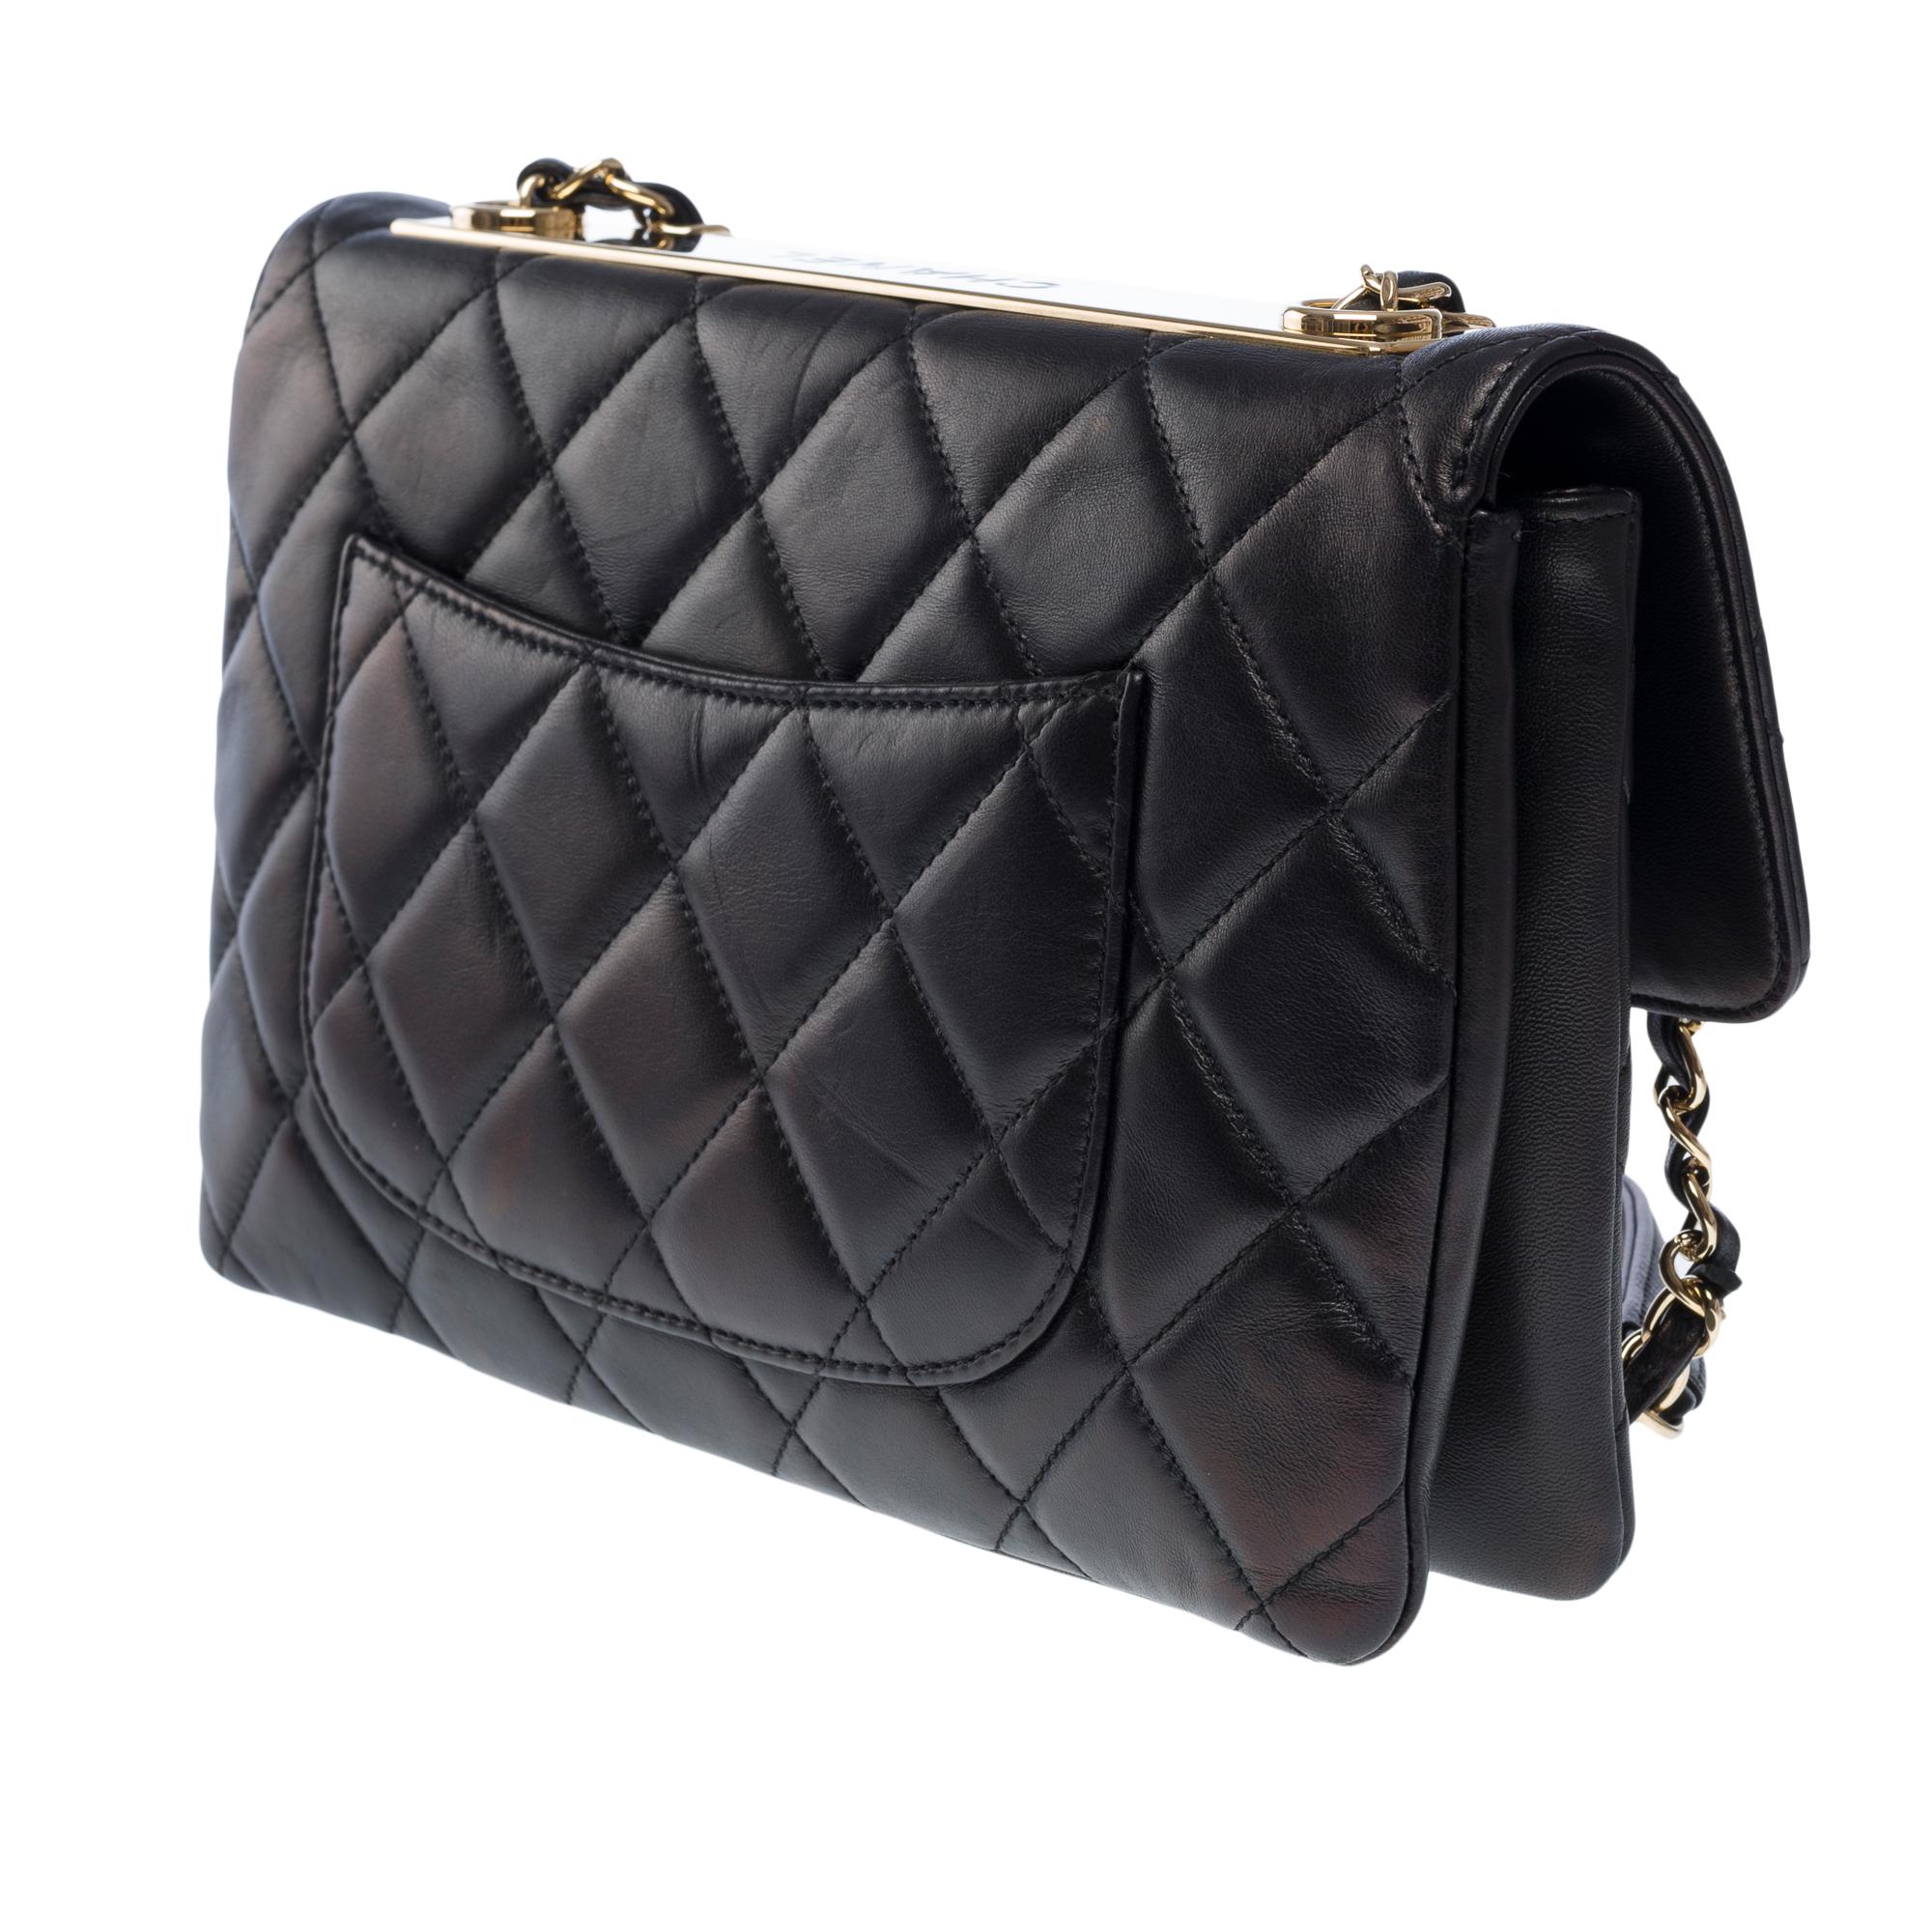 Rare Chanel Timeless/Classic Coco Trendy CC shoulder bag in black leather, GHW  For Sale 2